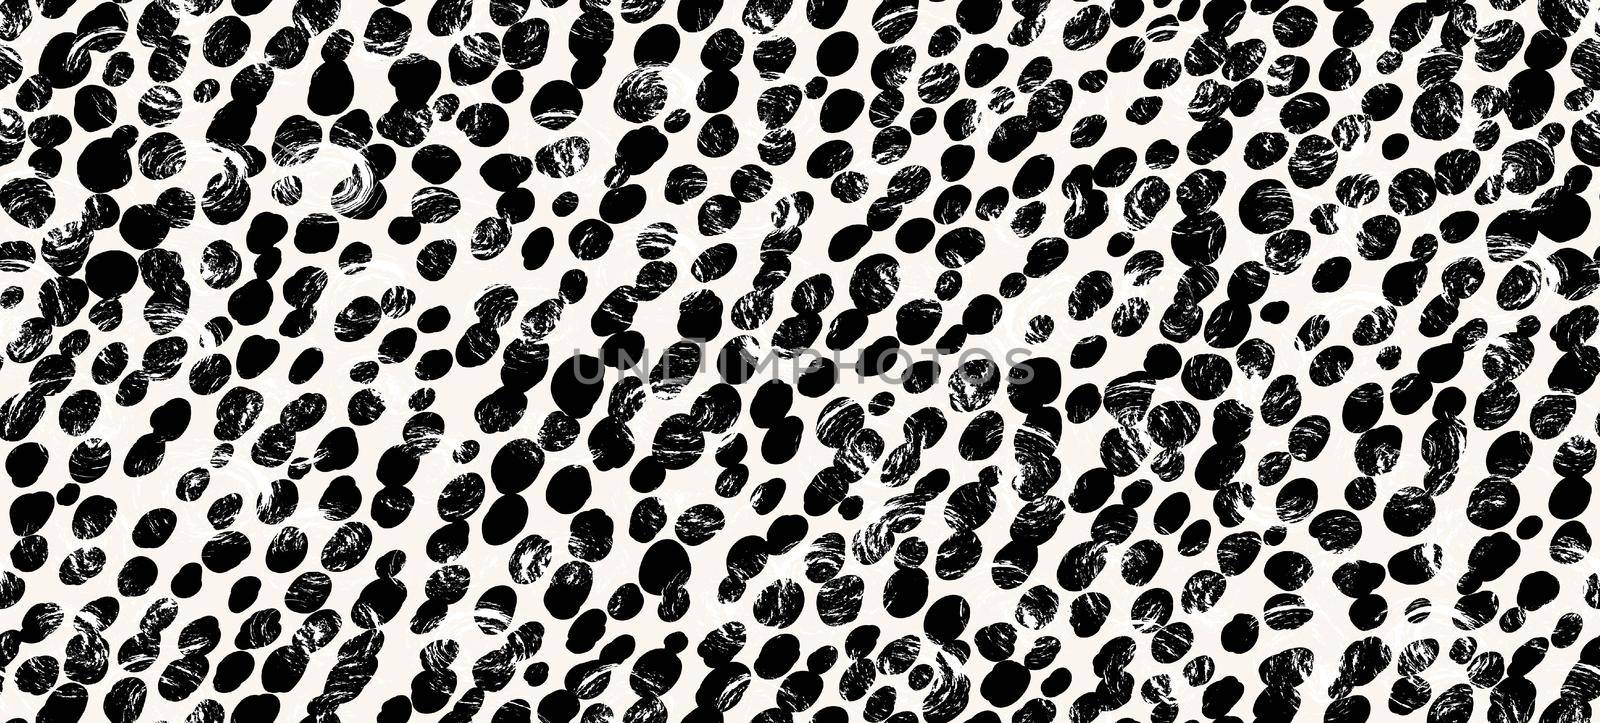 Abstract modern leopard seamless pattern. Animals trendy background. Black and white decorative vector stock illustration for print, card, postcard, fabric, textile. Modern ornament of stylized skin by allaku